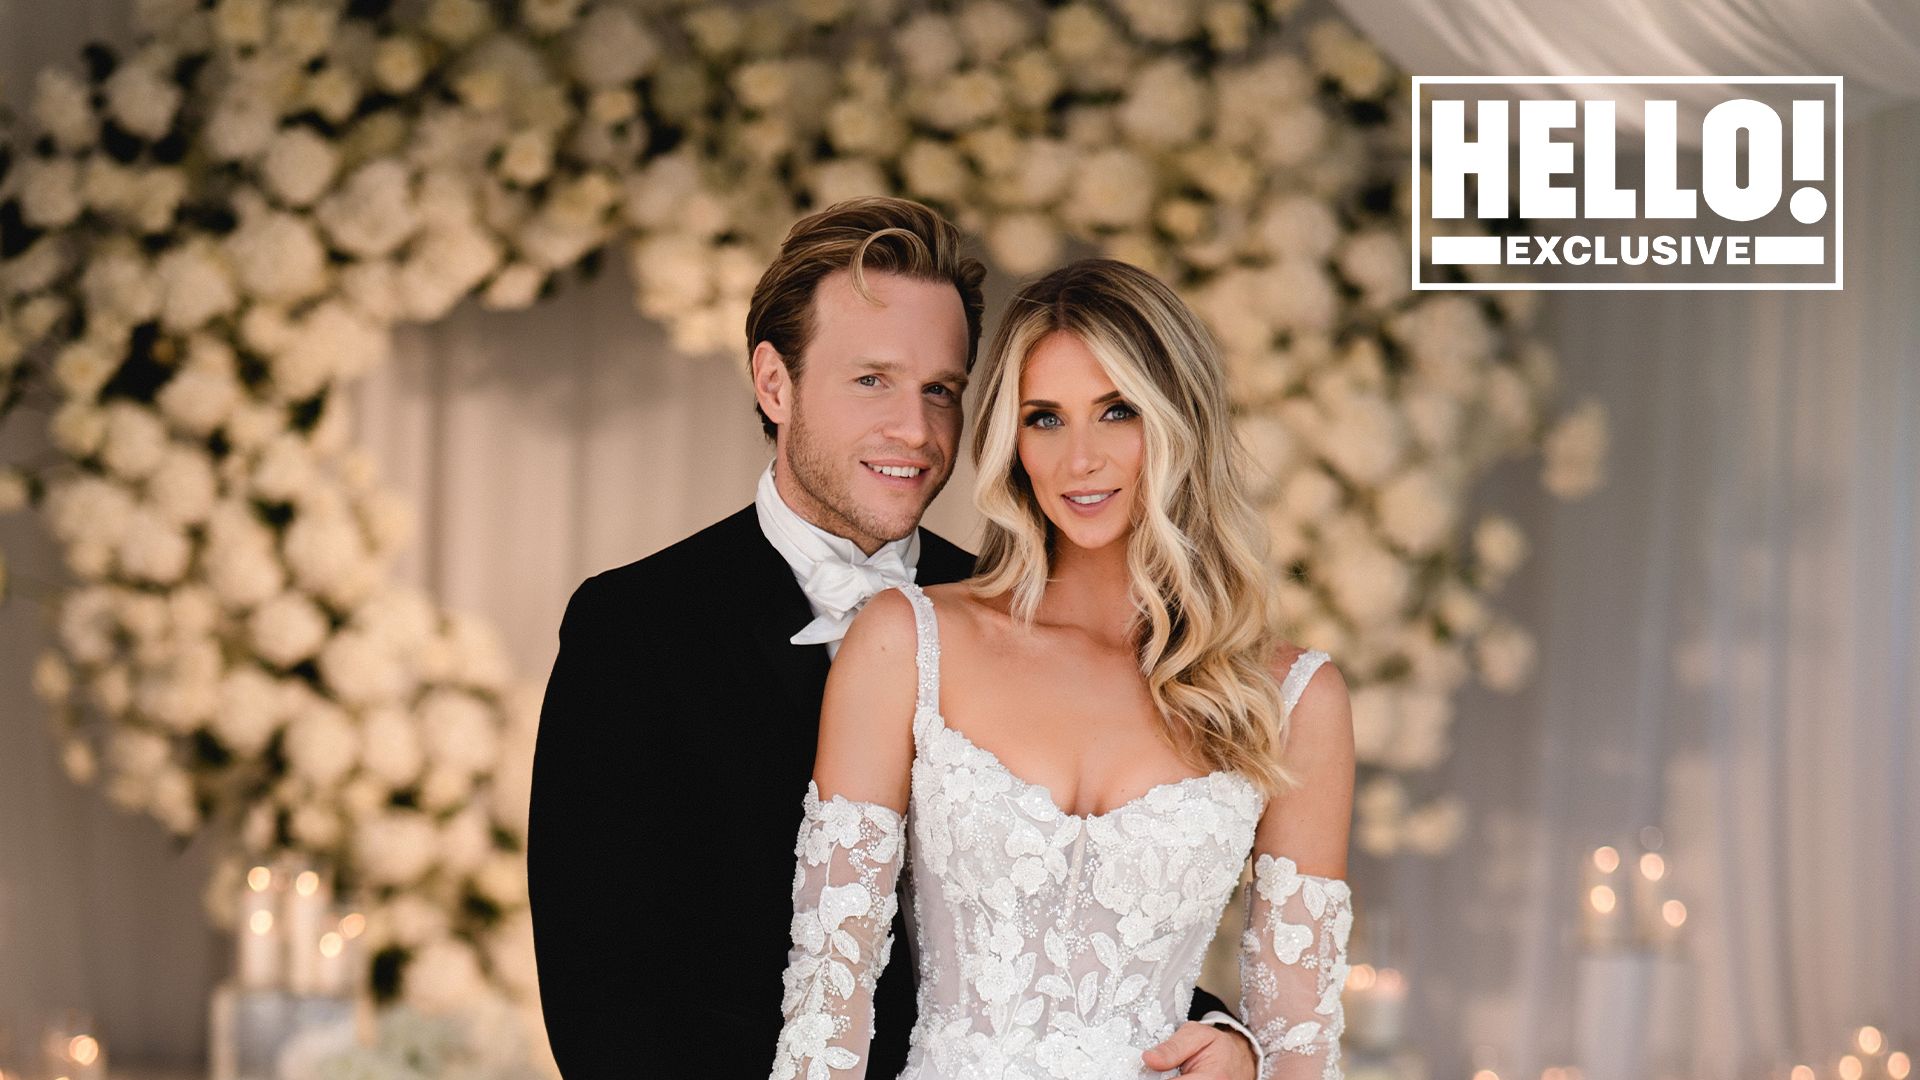 Inside Olly Murs and Amelia Tank's magical wedding - see all the ex...